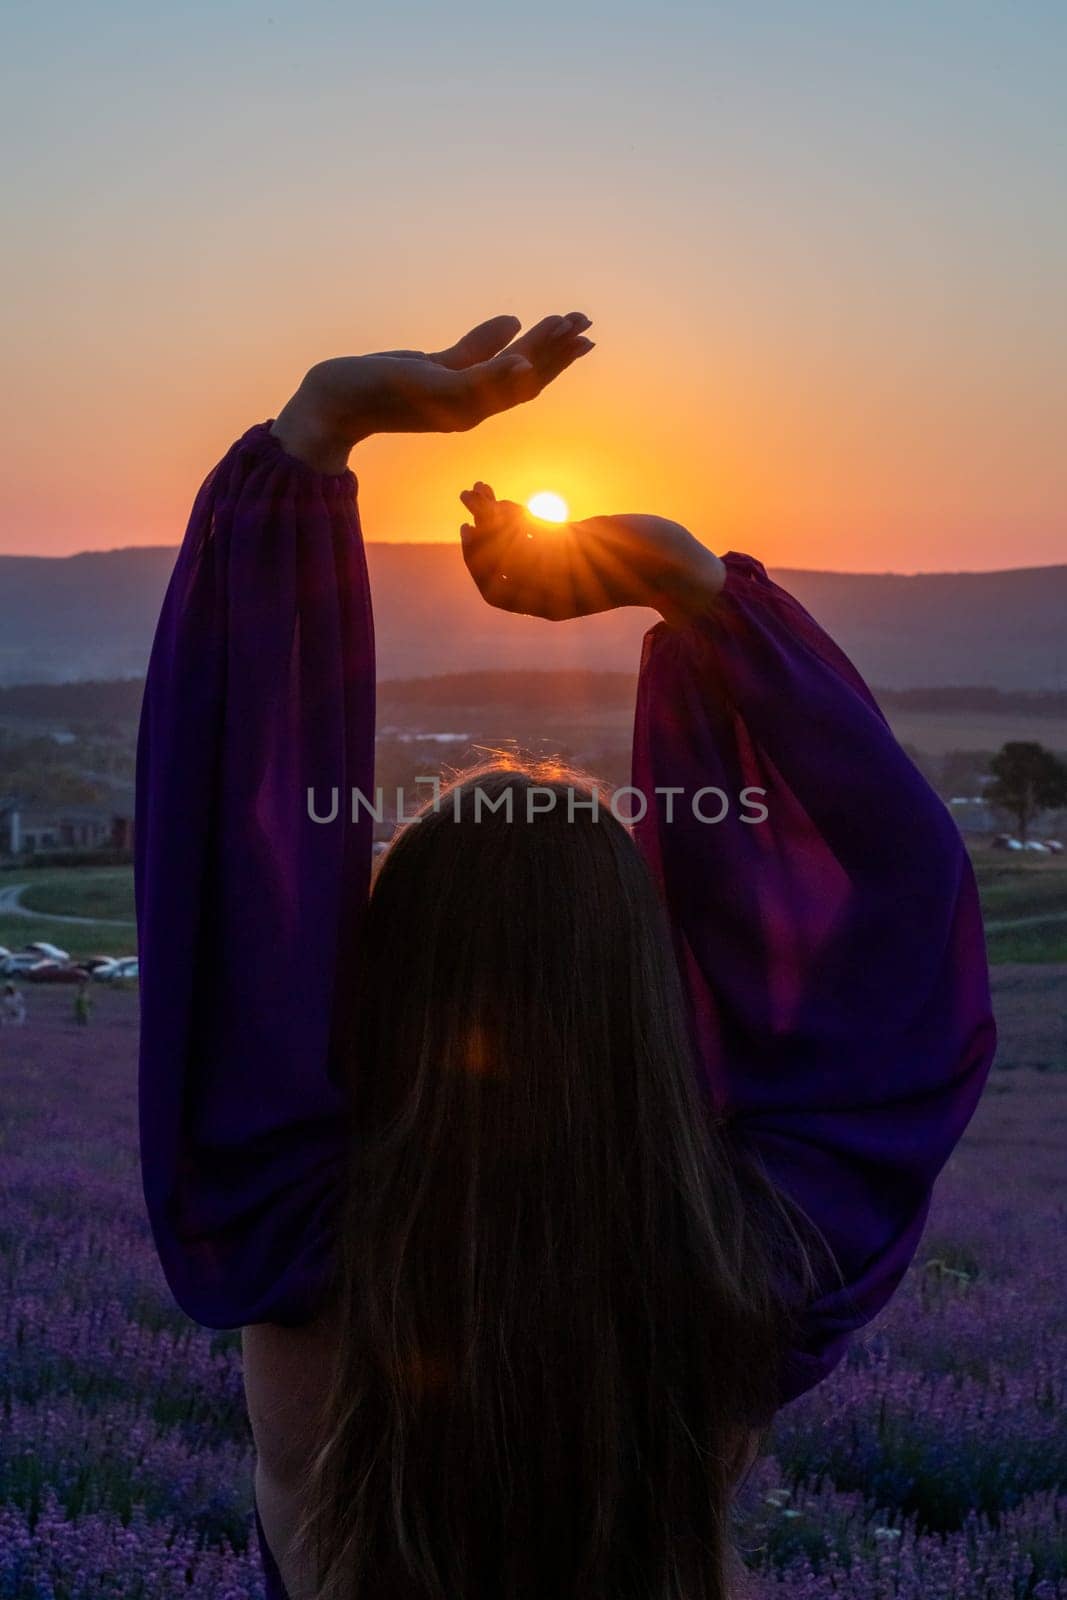 Woman raises arms in lavander field at sunset enjoys sunset in purple flower field. Serene floral setting. Setting sun. Conveying peaceful ambiance in flower field at sunset